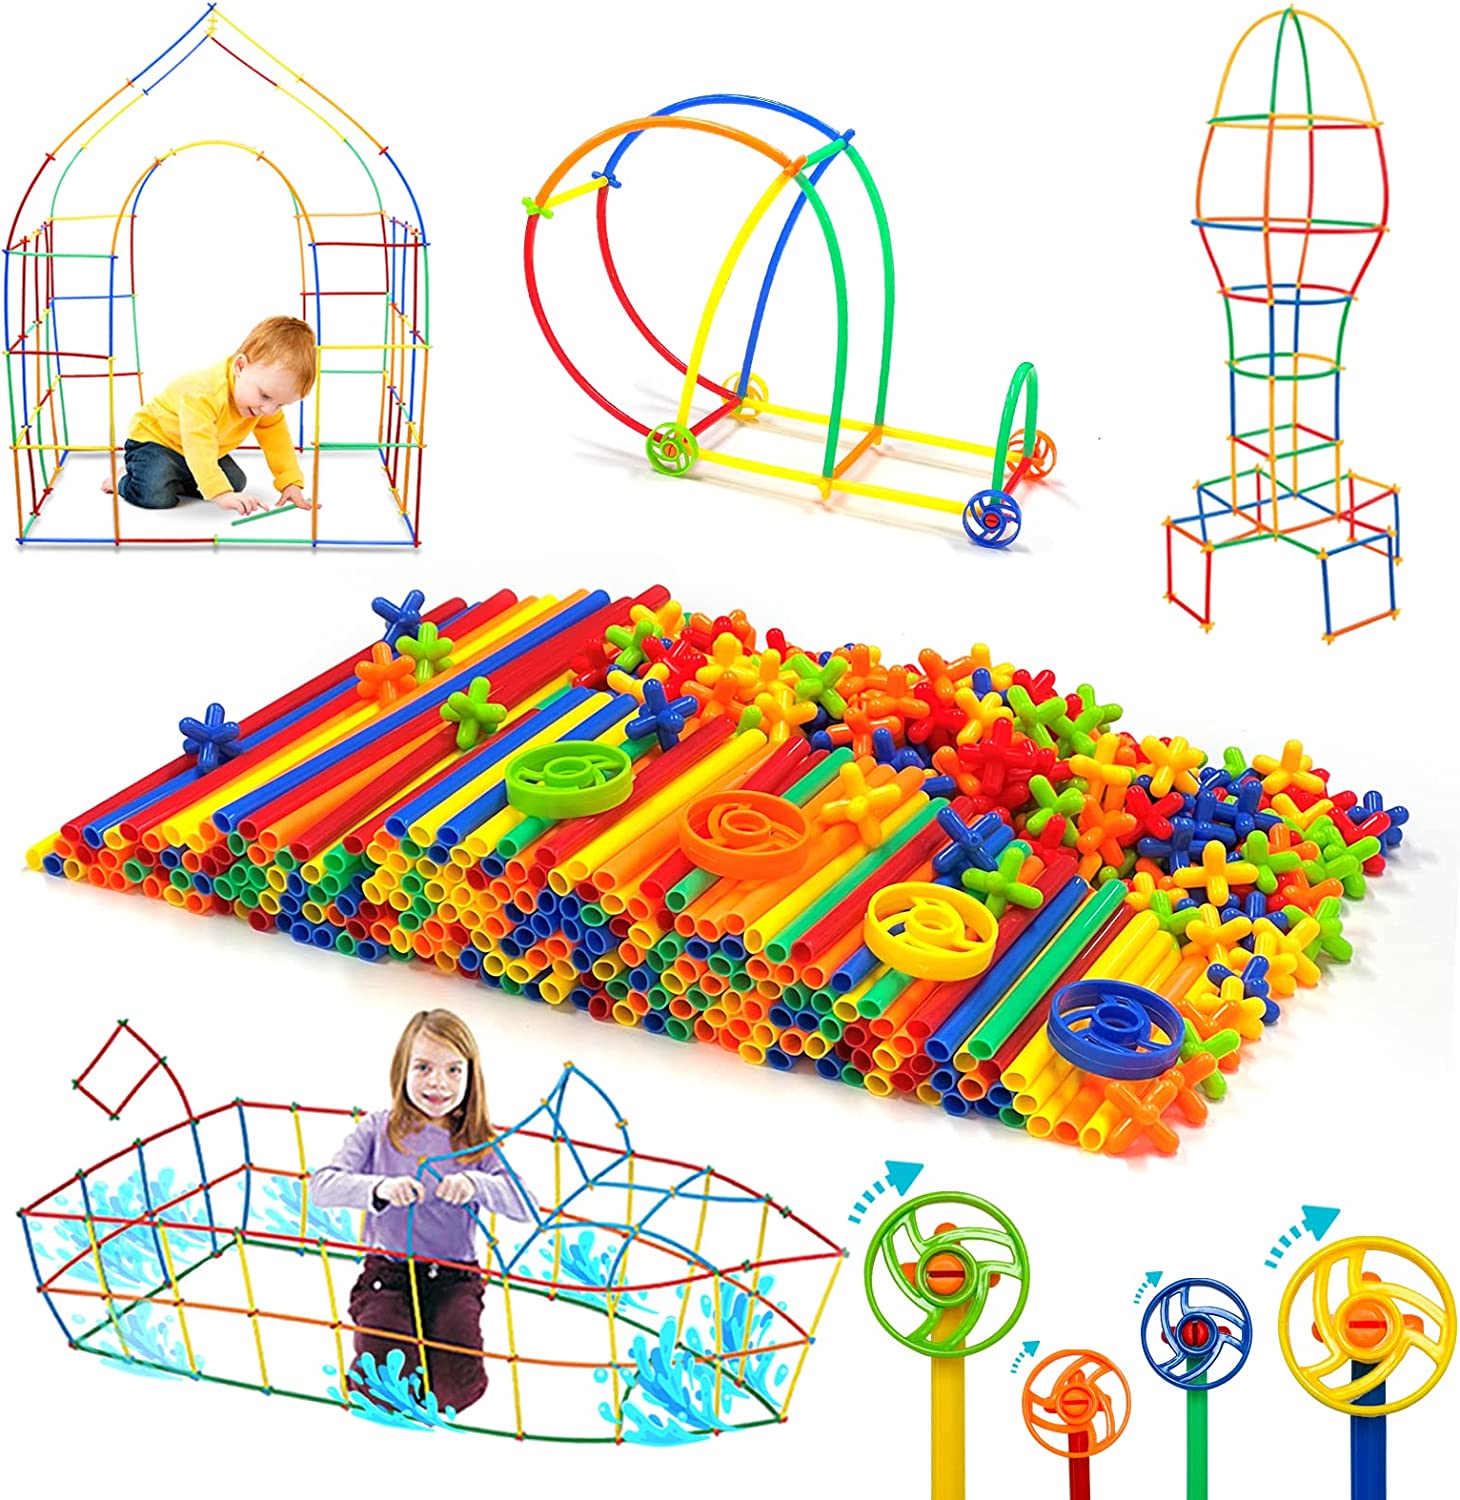 Straw Constructor Toys STEM Building 600Pcs Toy Interlocking Plastic  Engineering Thin Tube Blocks Educational Kit for 3 4 5 6 7years Kids Boys  and